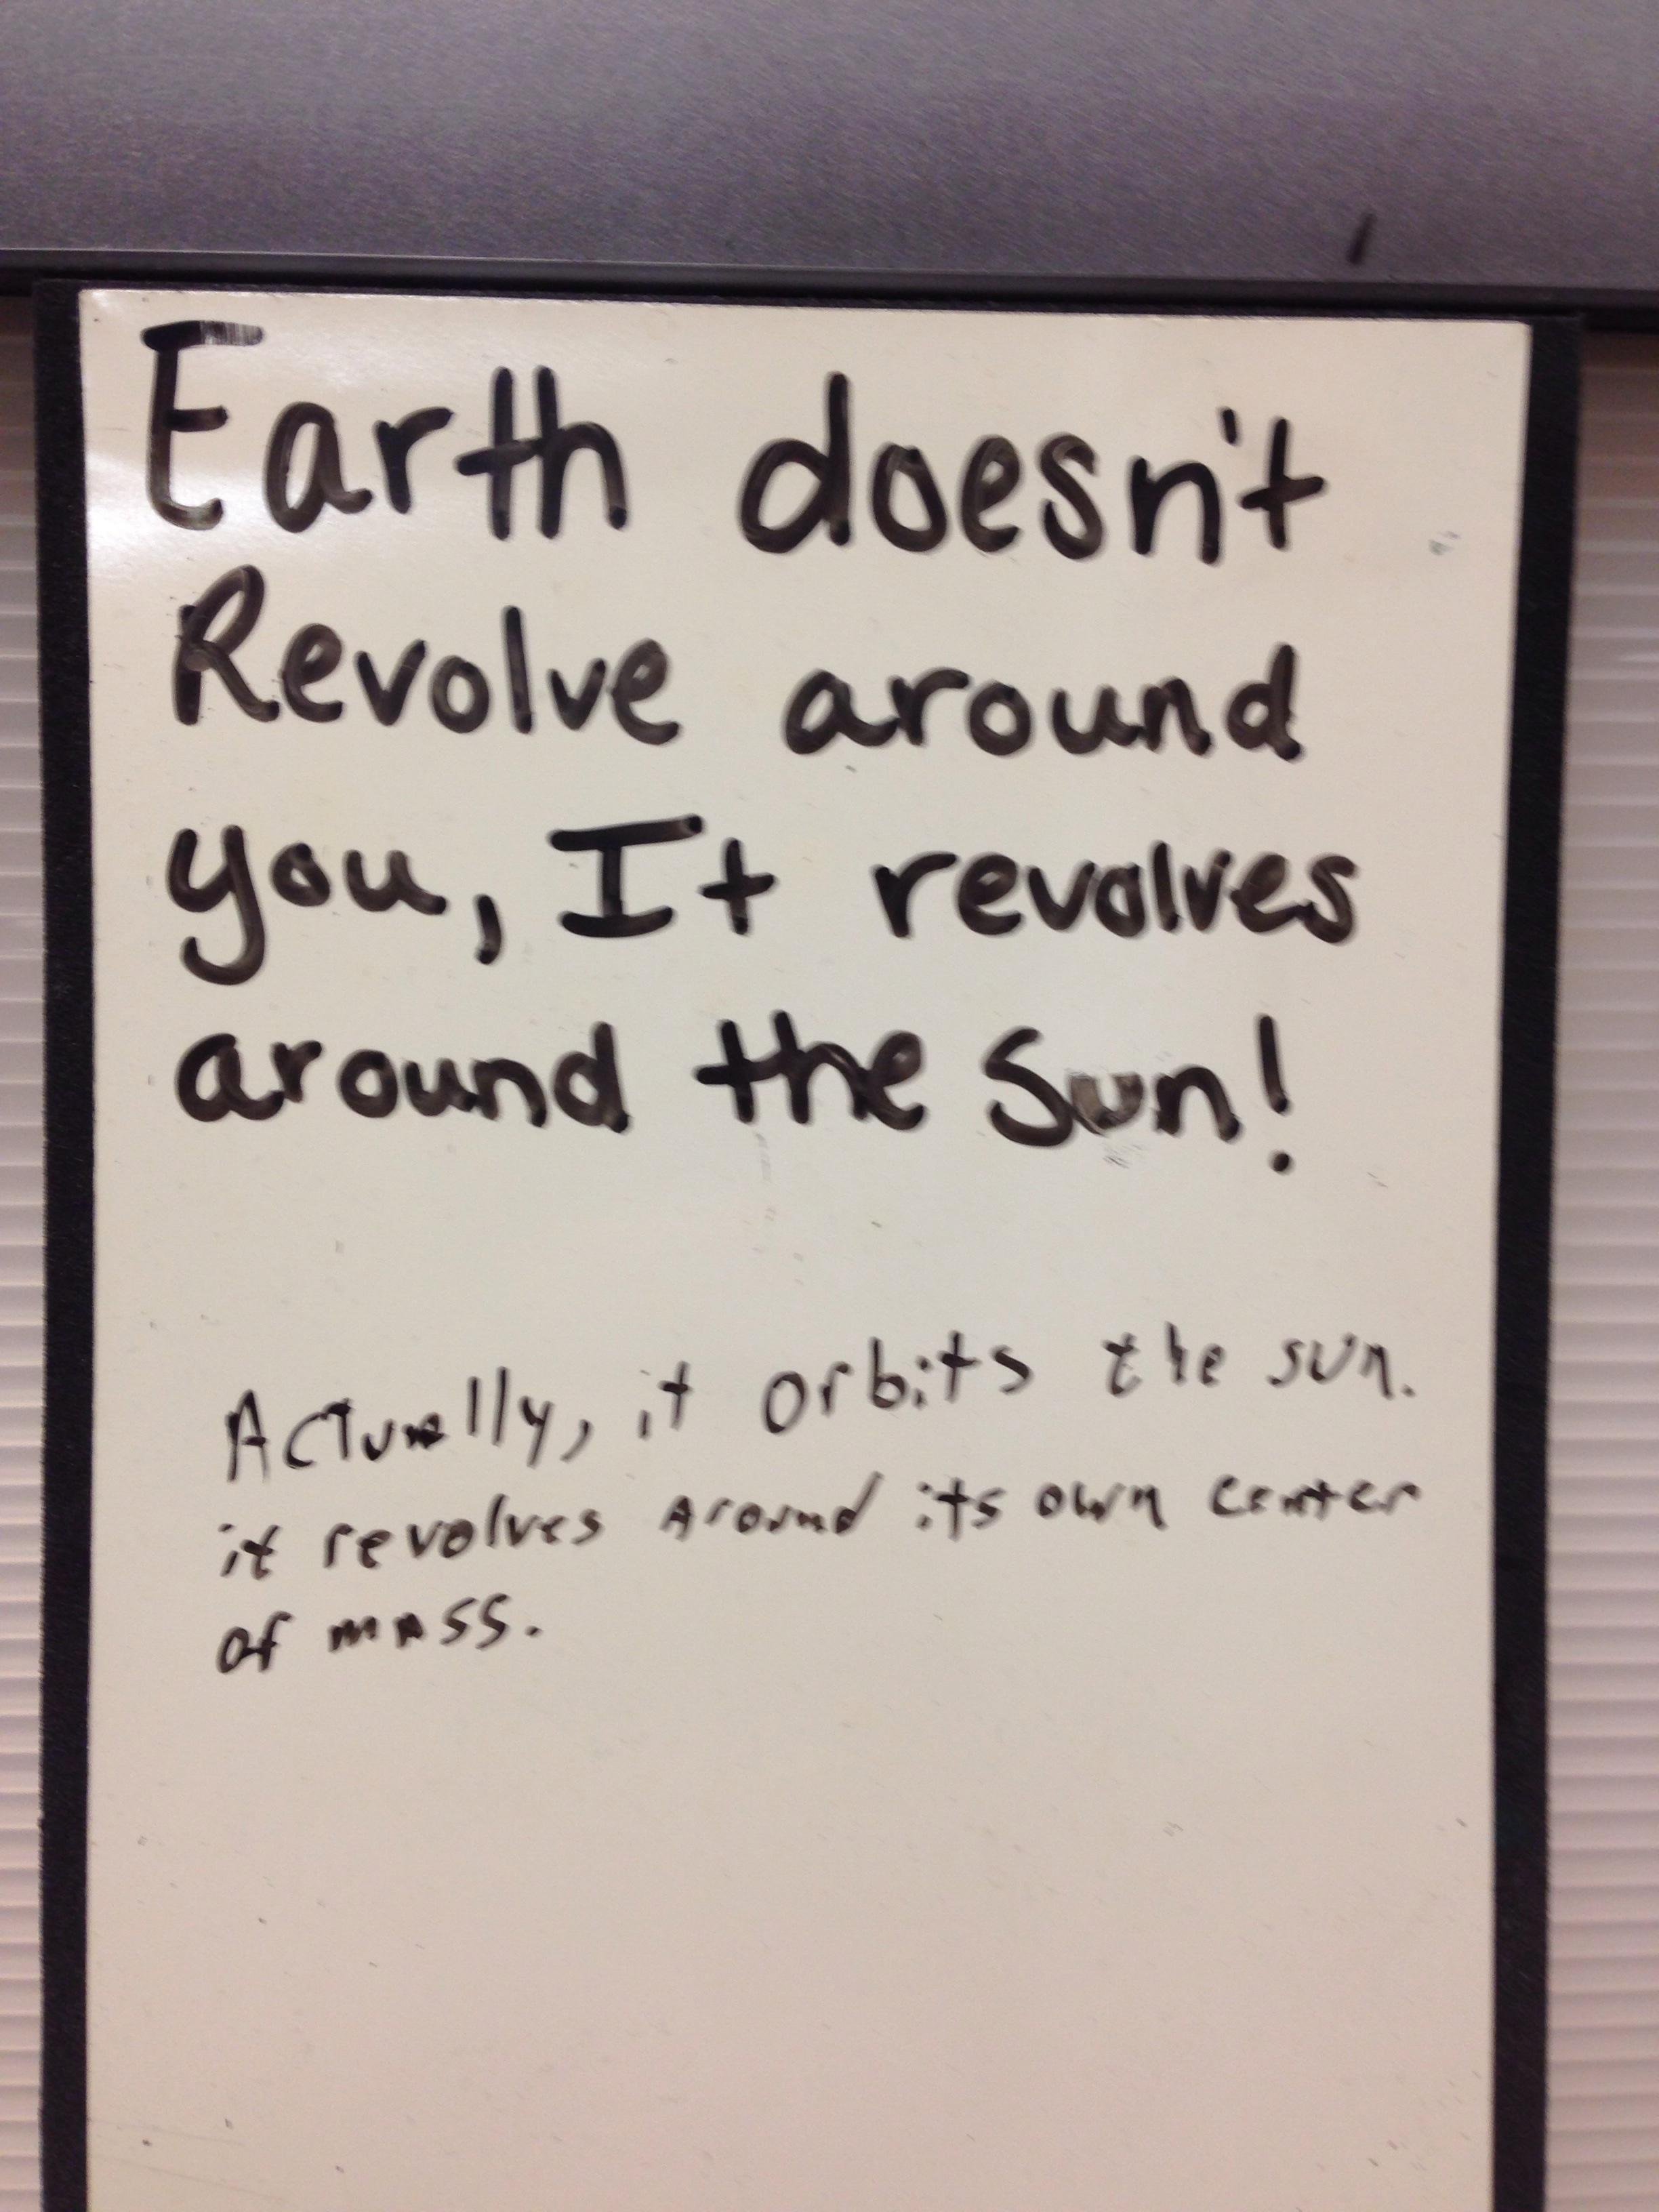 Earth doesn't revolve around you.